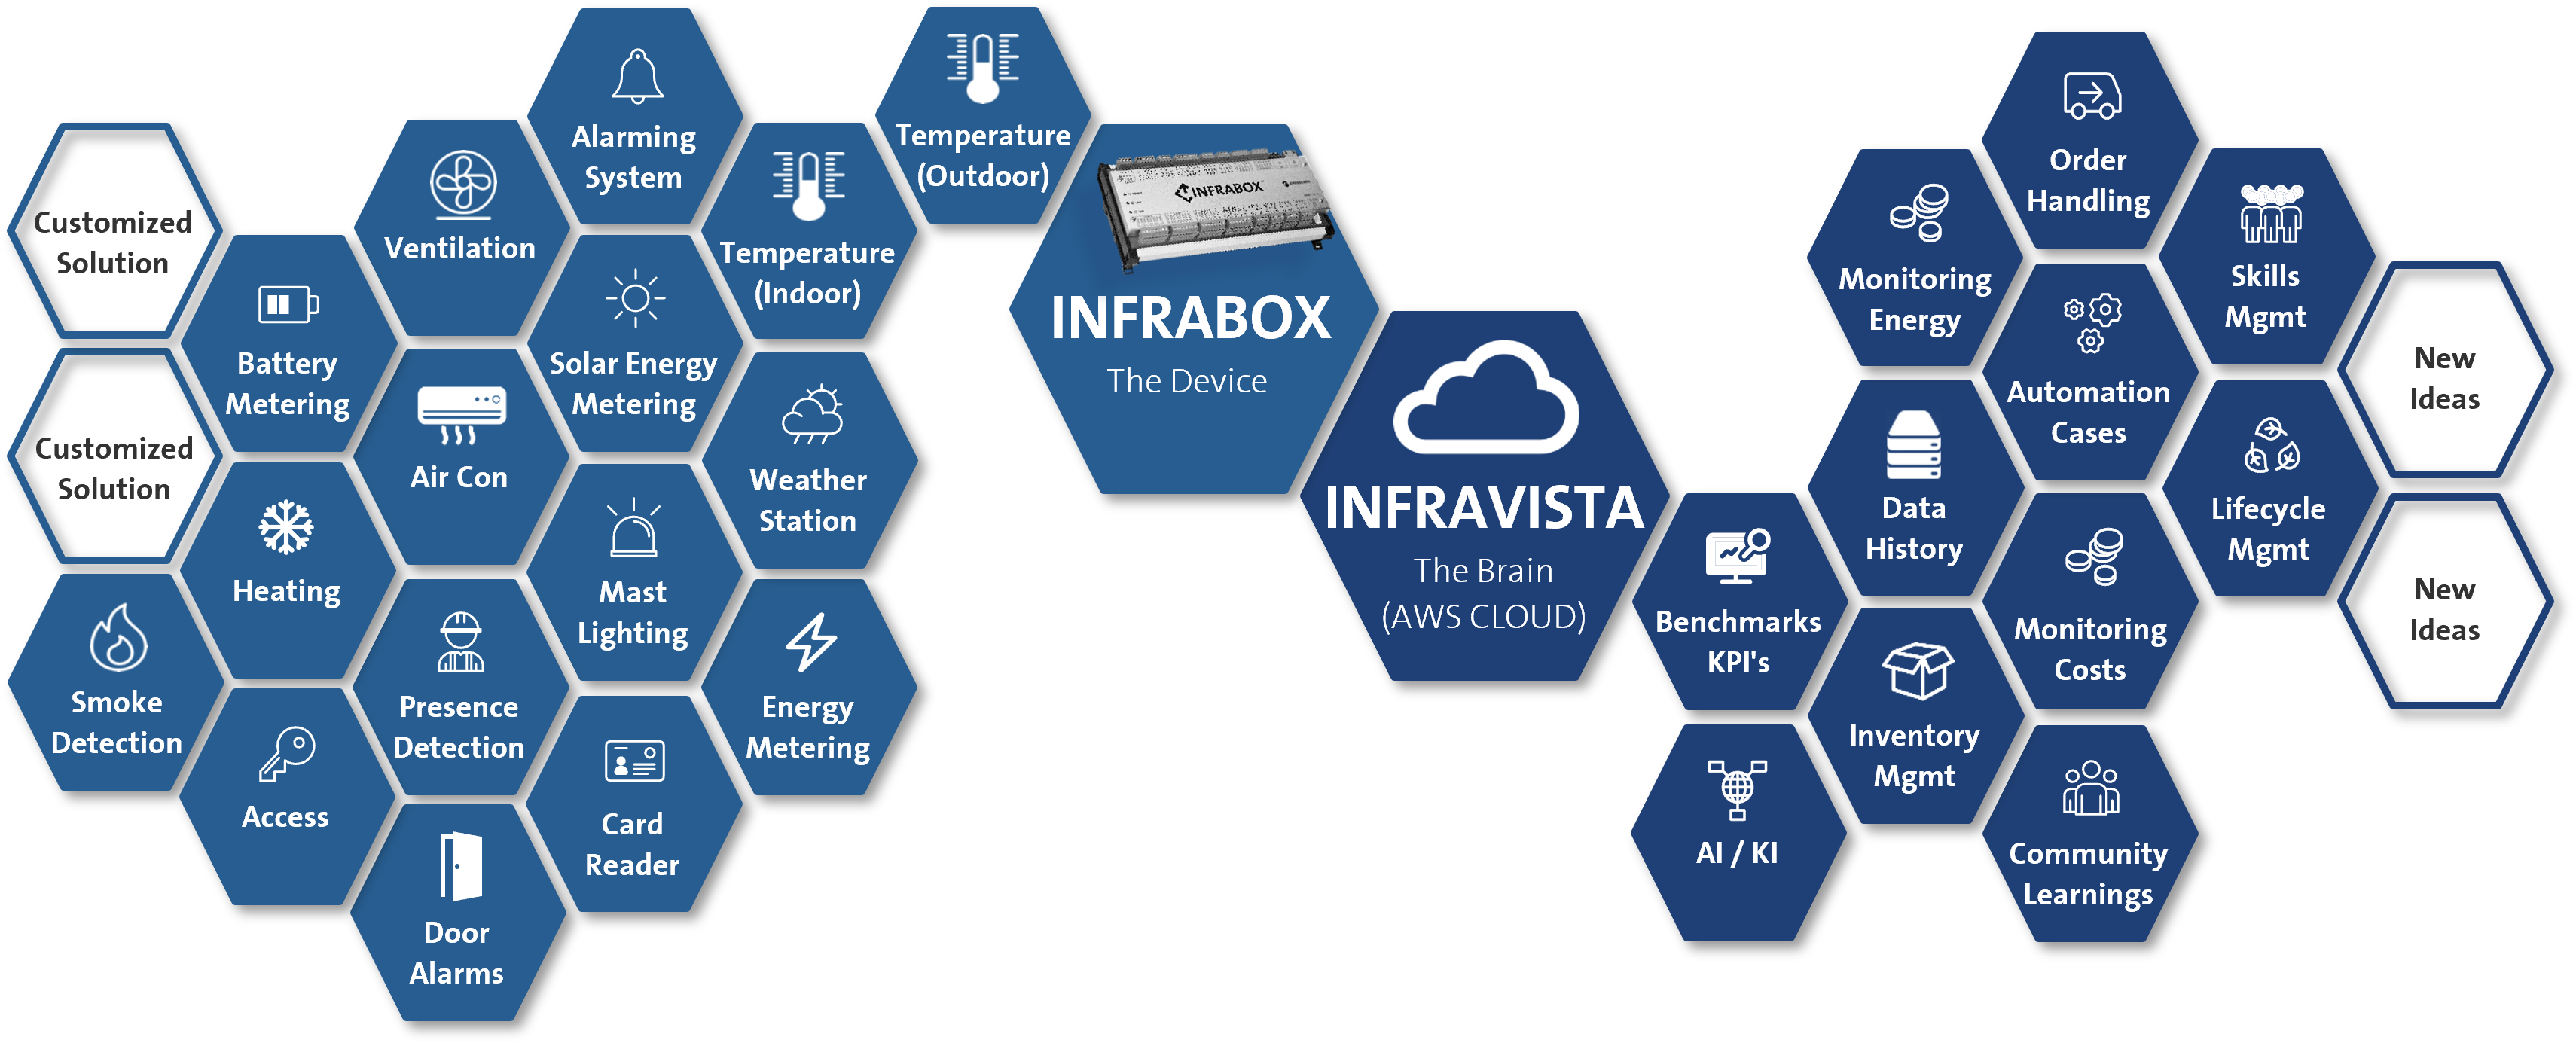 Infravista - A diagram showing the different types of Modular infrastructure.